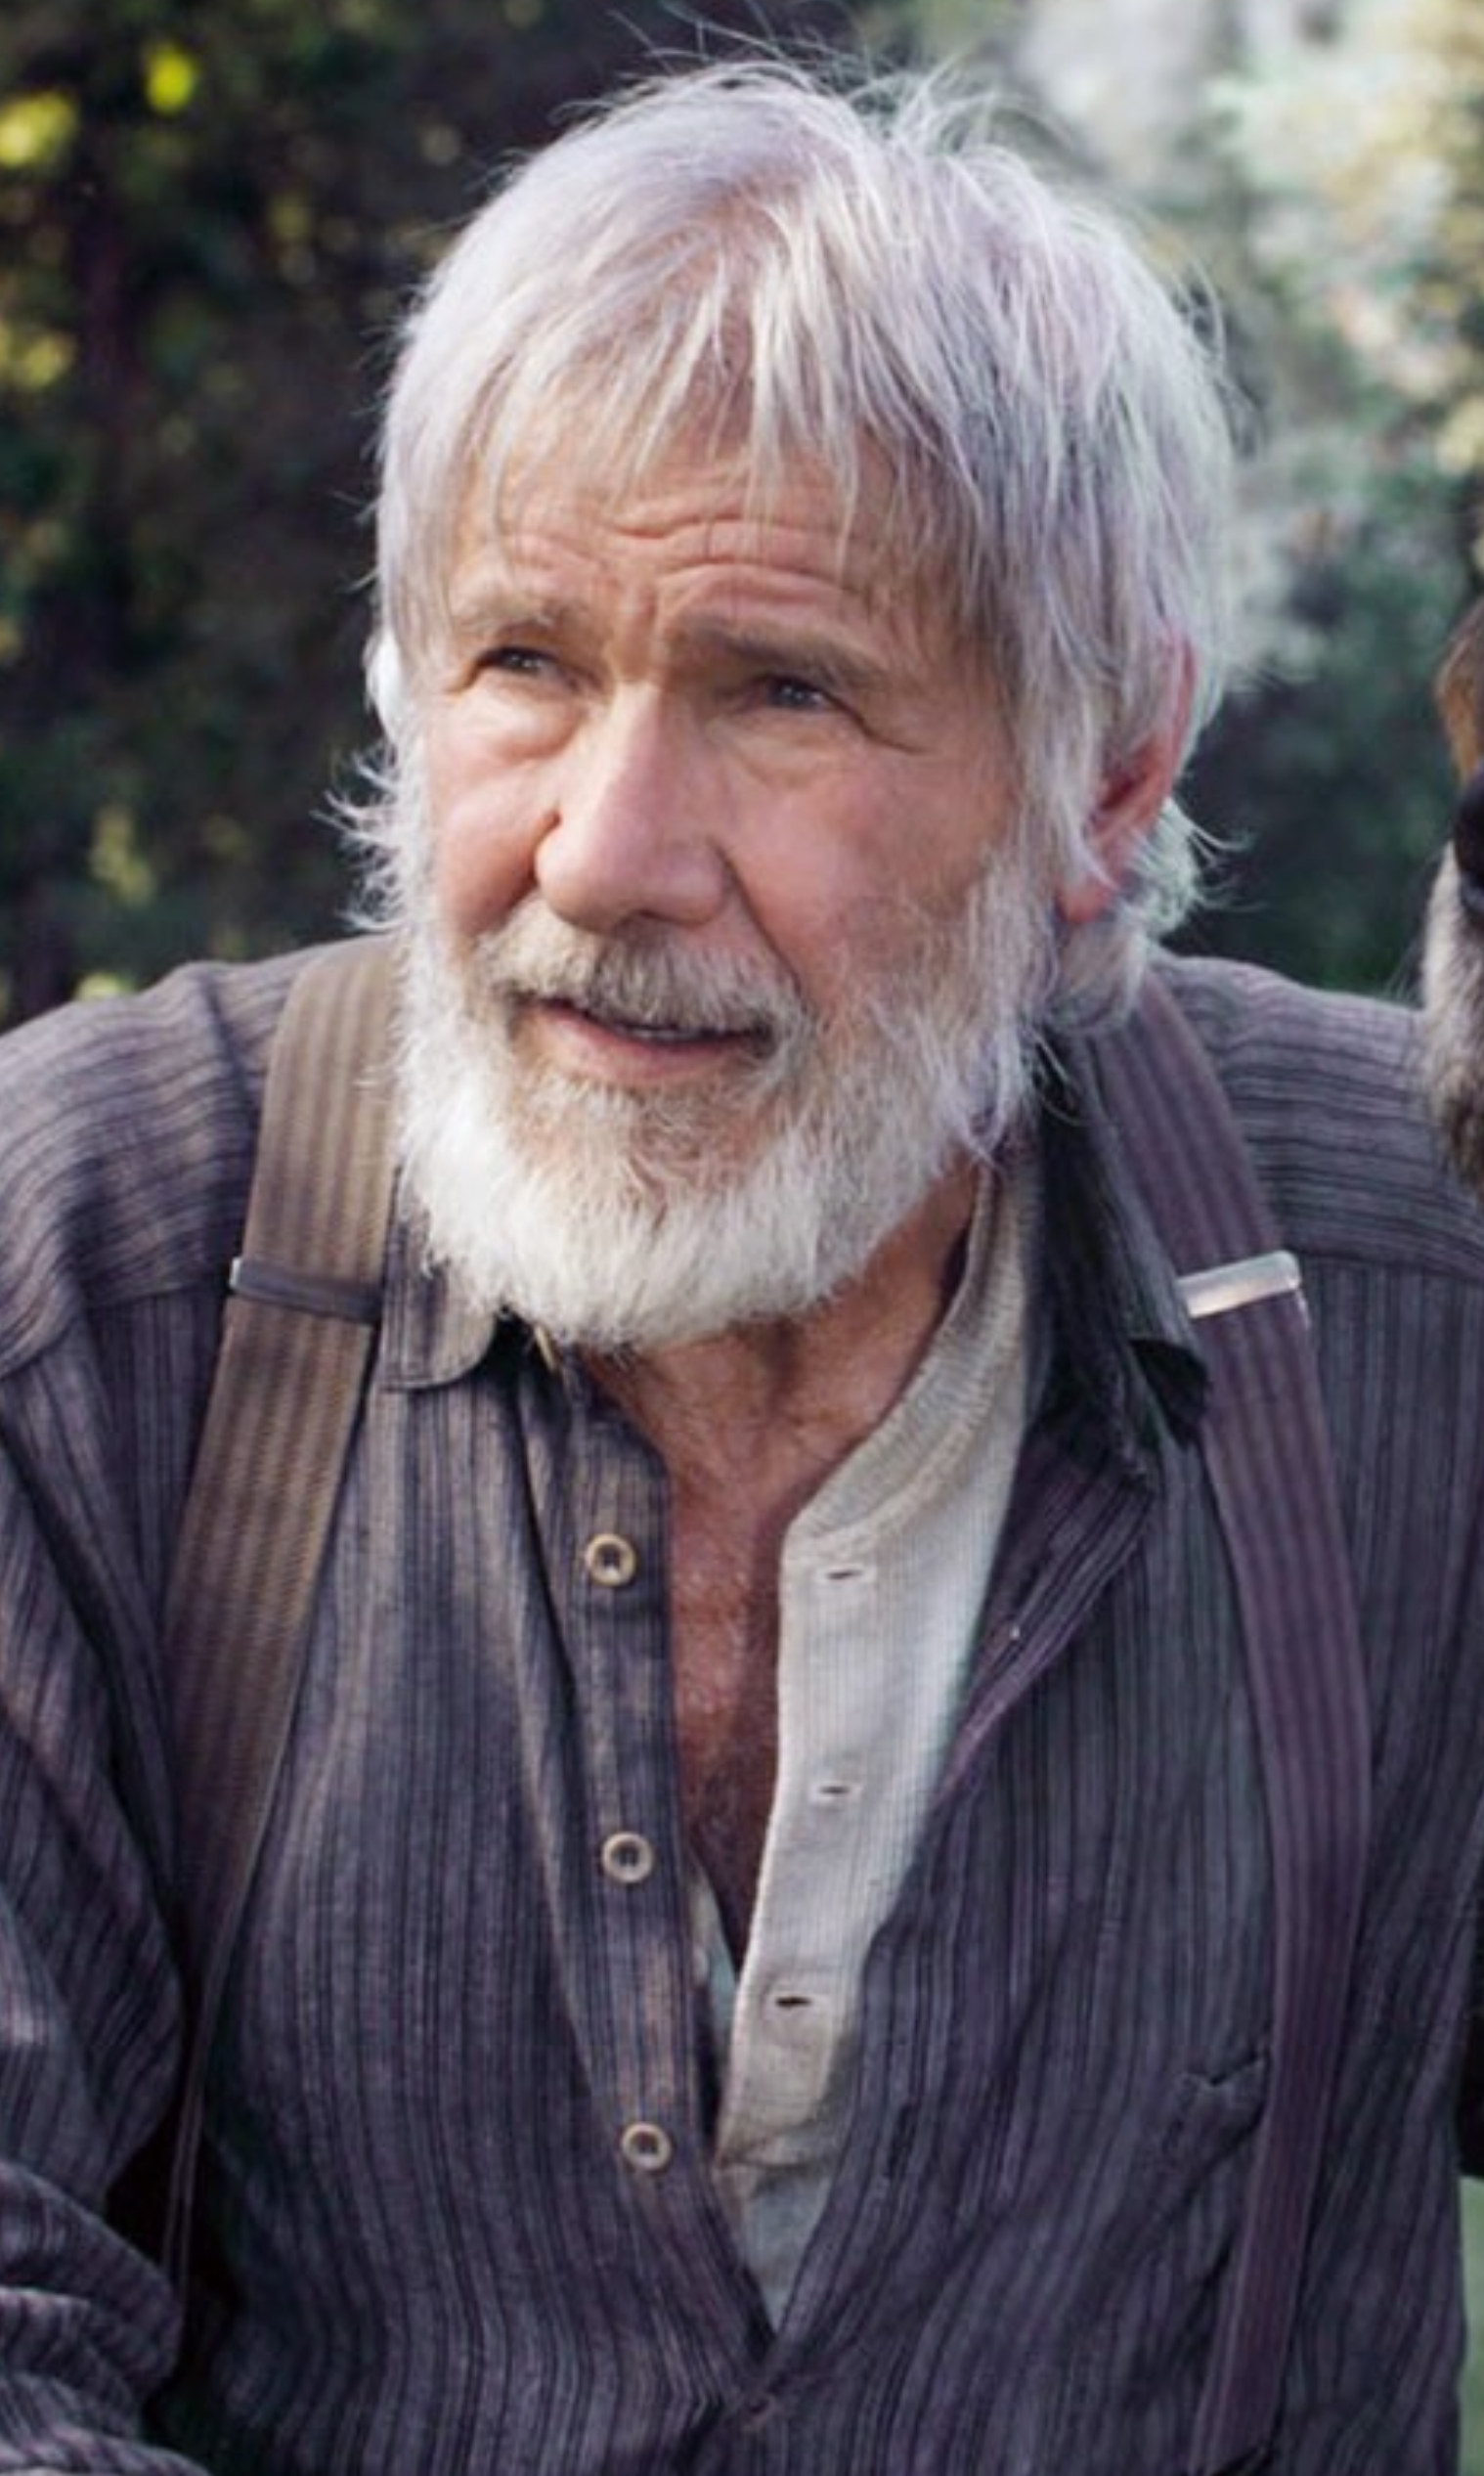 Ford wearing a worn-out shirt and grey beard